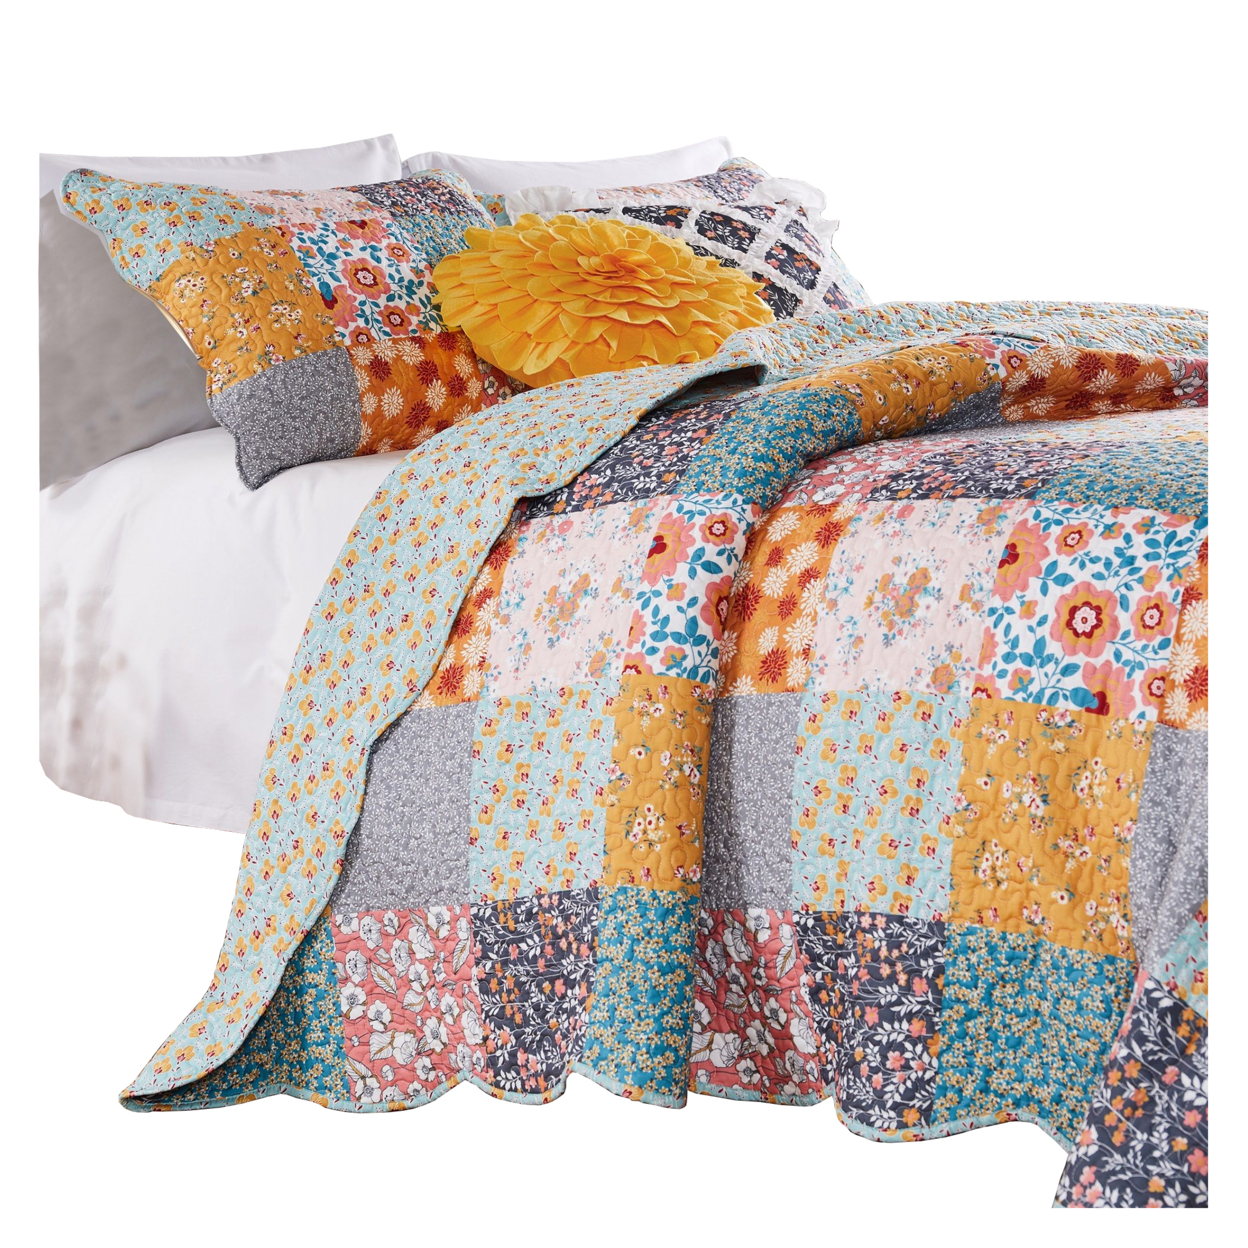 3 Piece Full Queen Quilt Set With Floral Print, Multicolor- Saltoro Sherpi